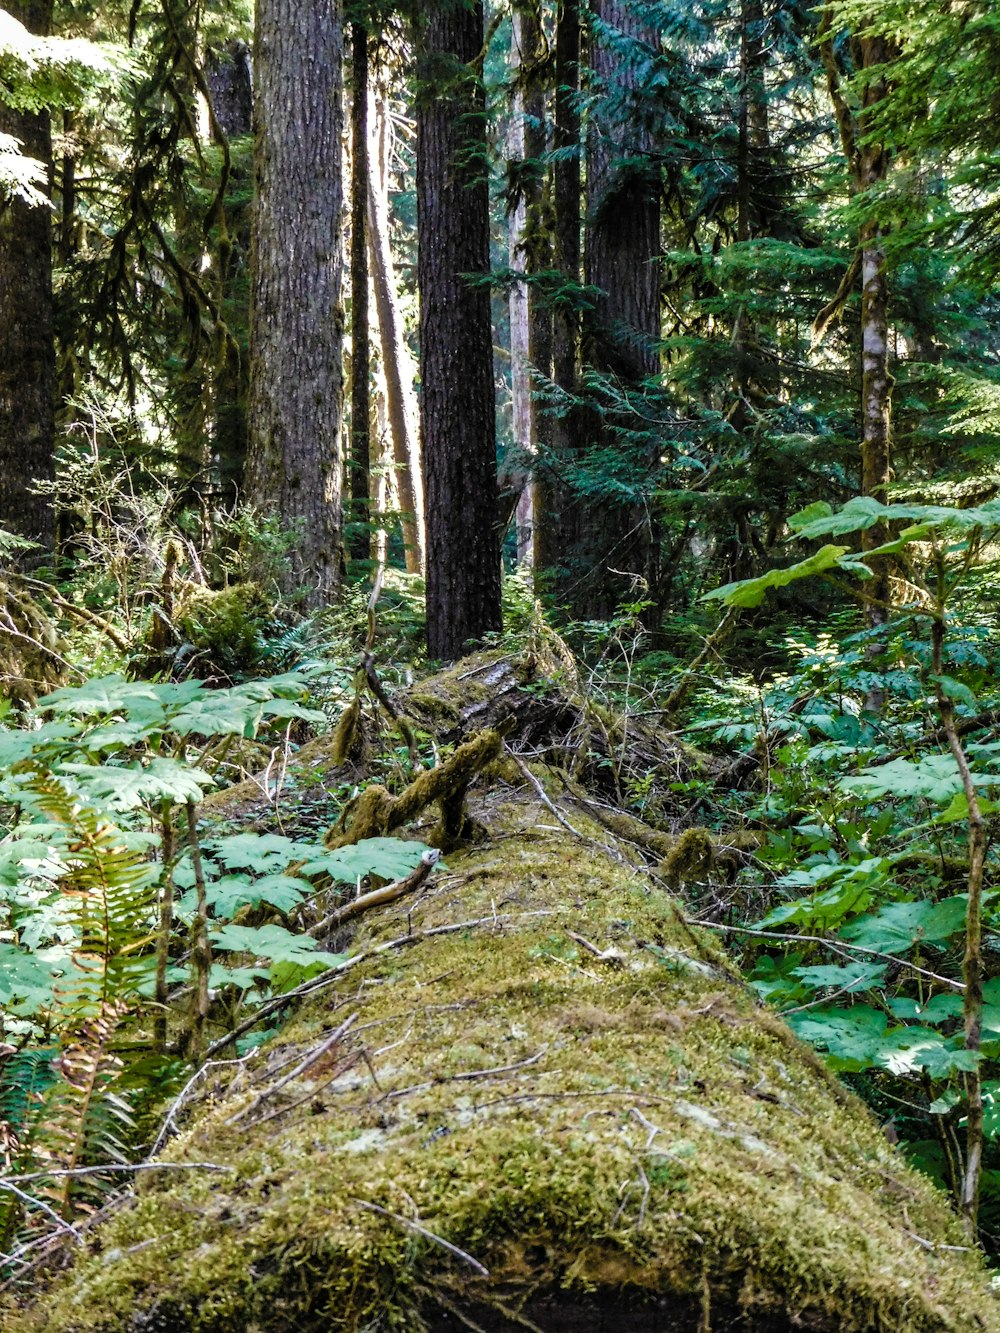 a moss covered log in the middle of a forest